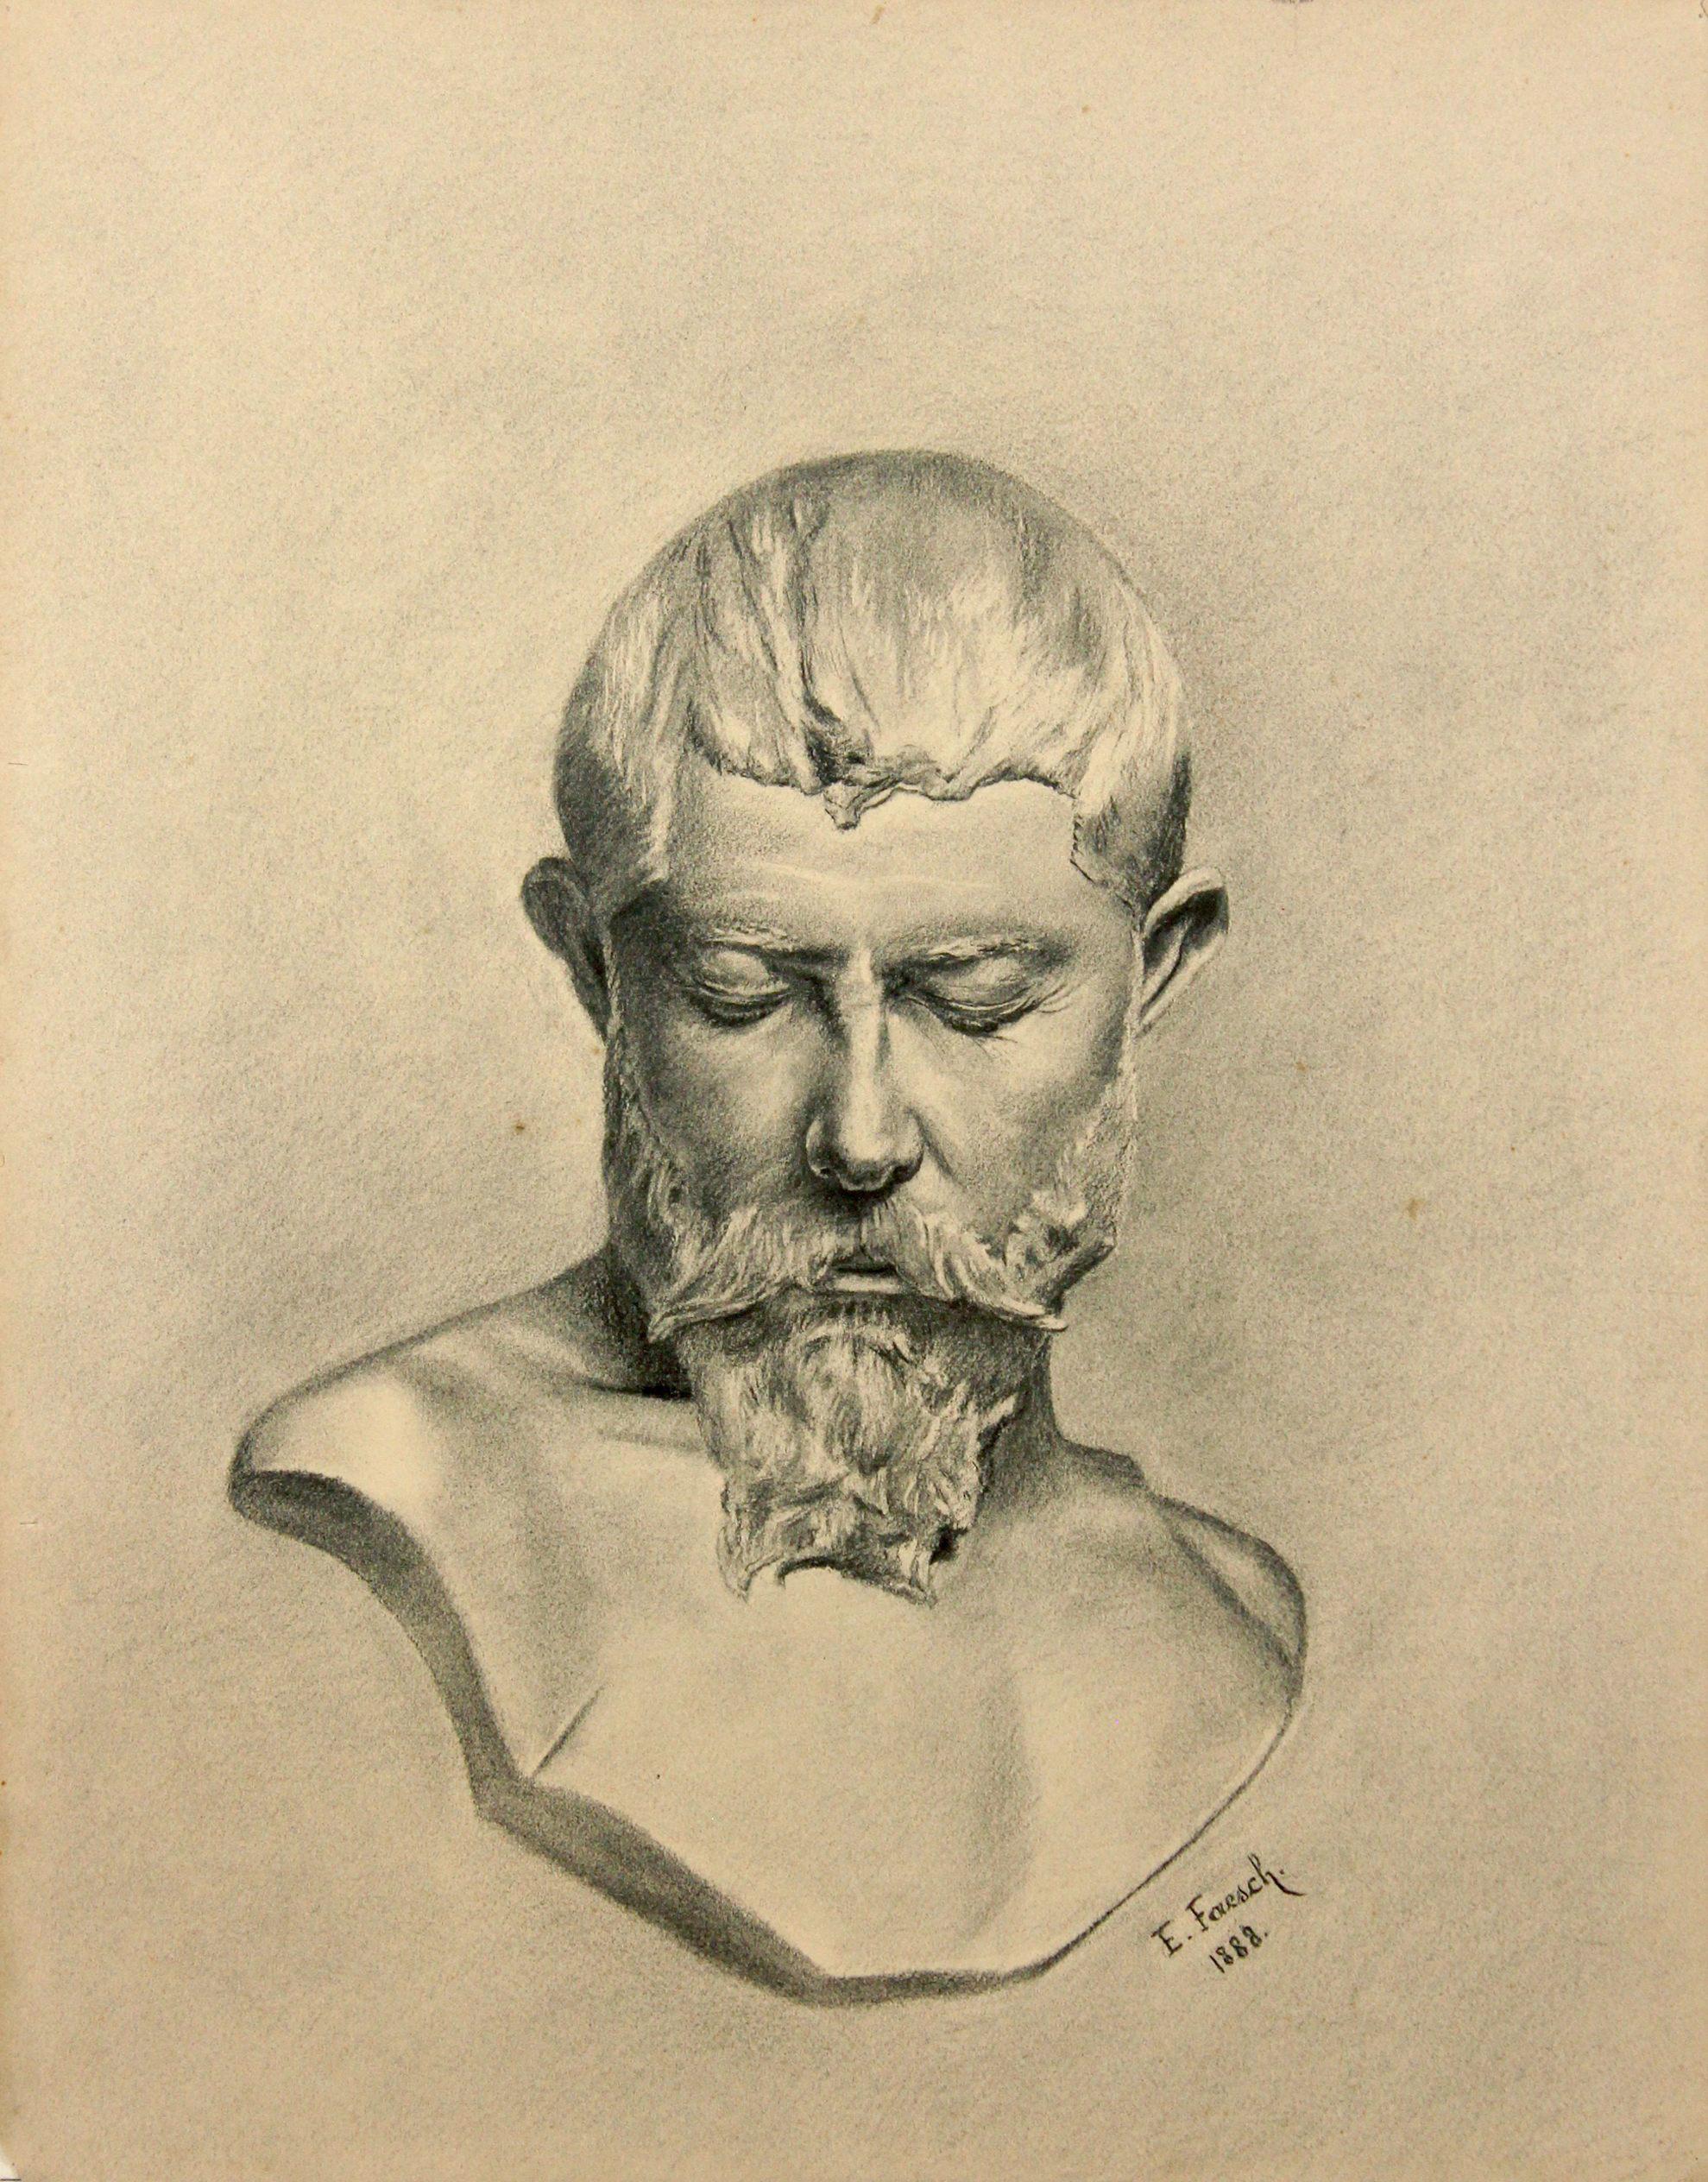 Sketch of a head - Carved in stone - - Art by Emil Faesch